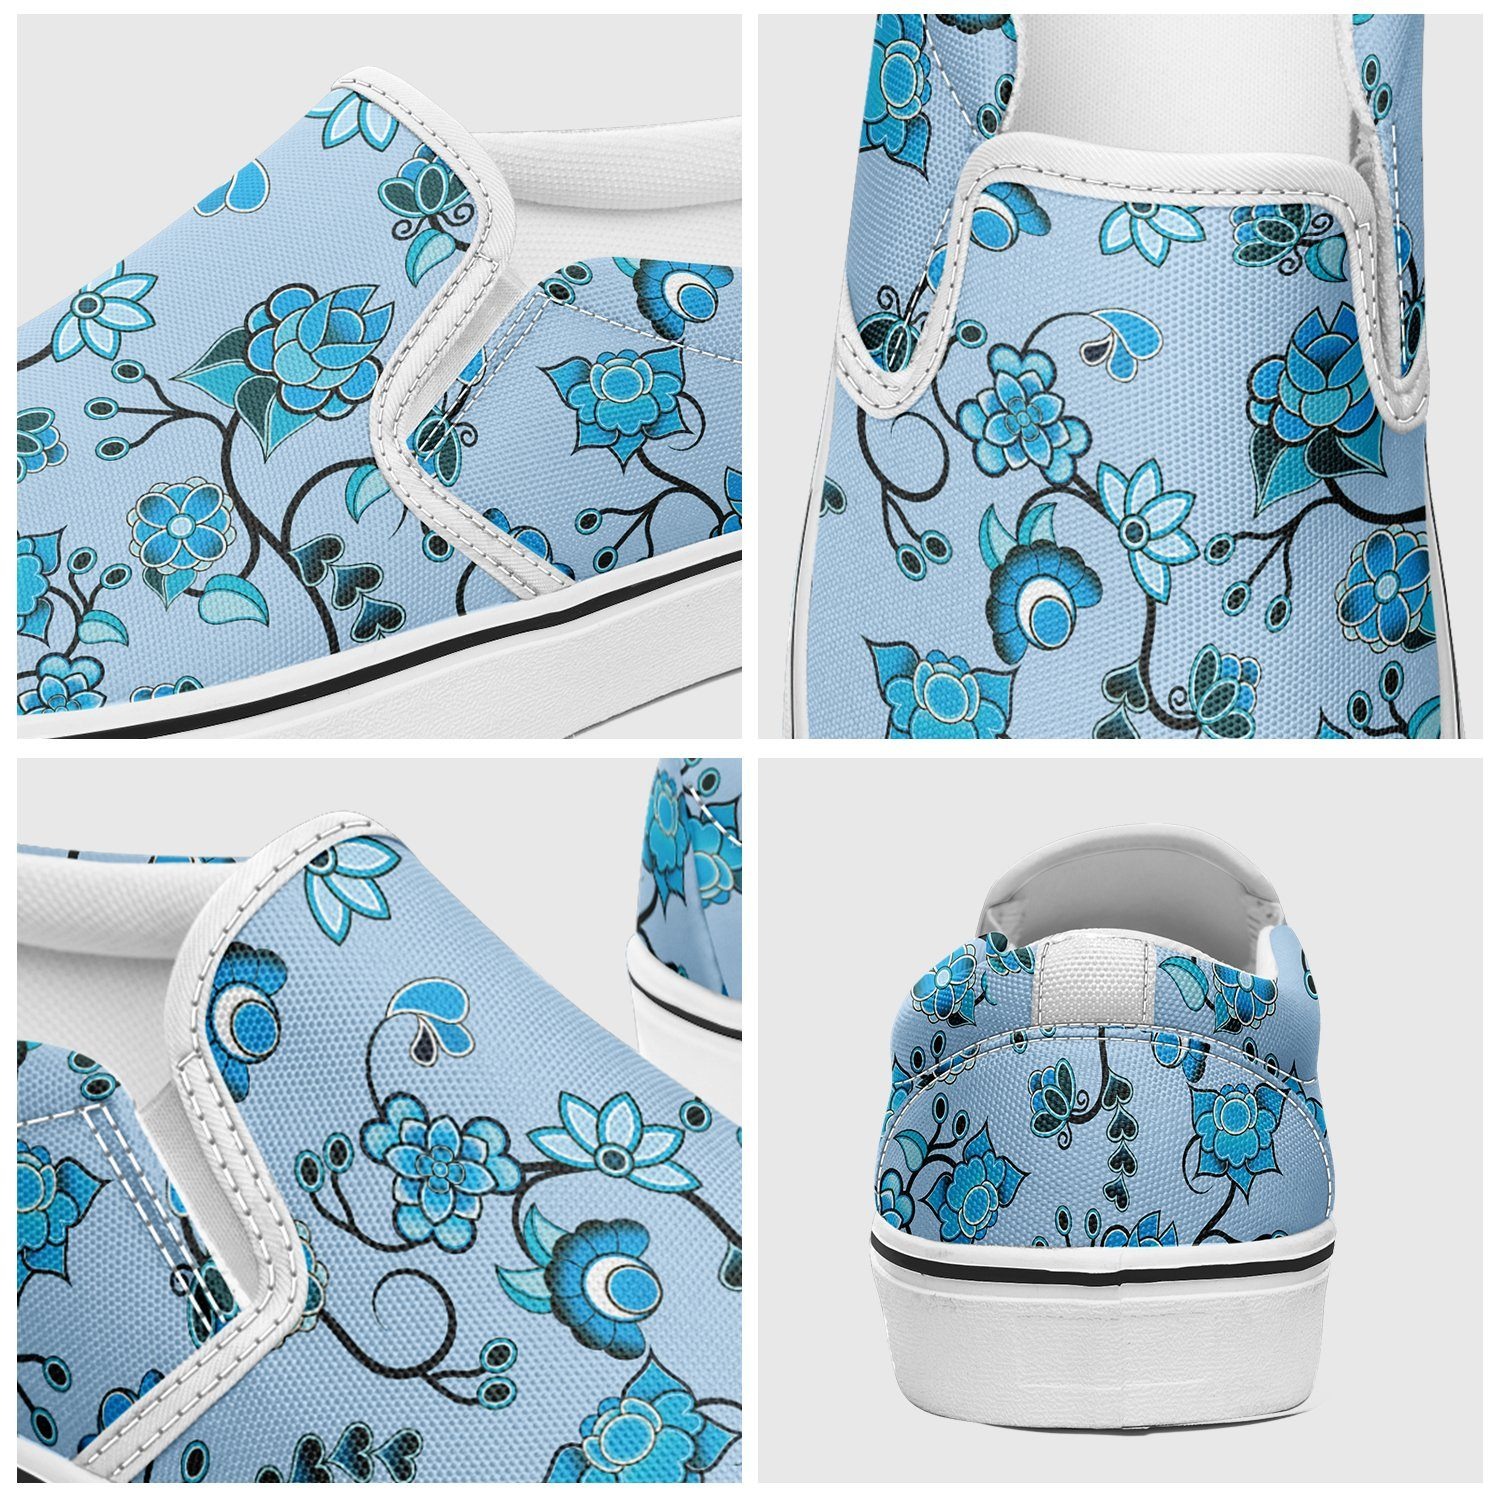 Blue Floral Amour Otoyimm Canvas Slip On Shoes